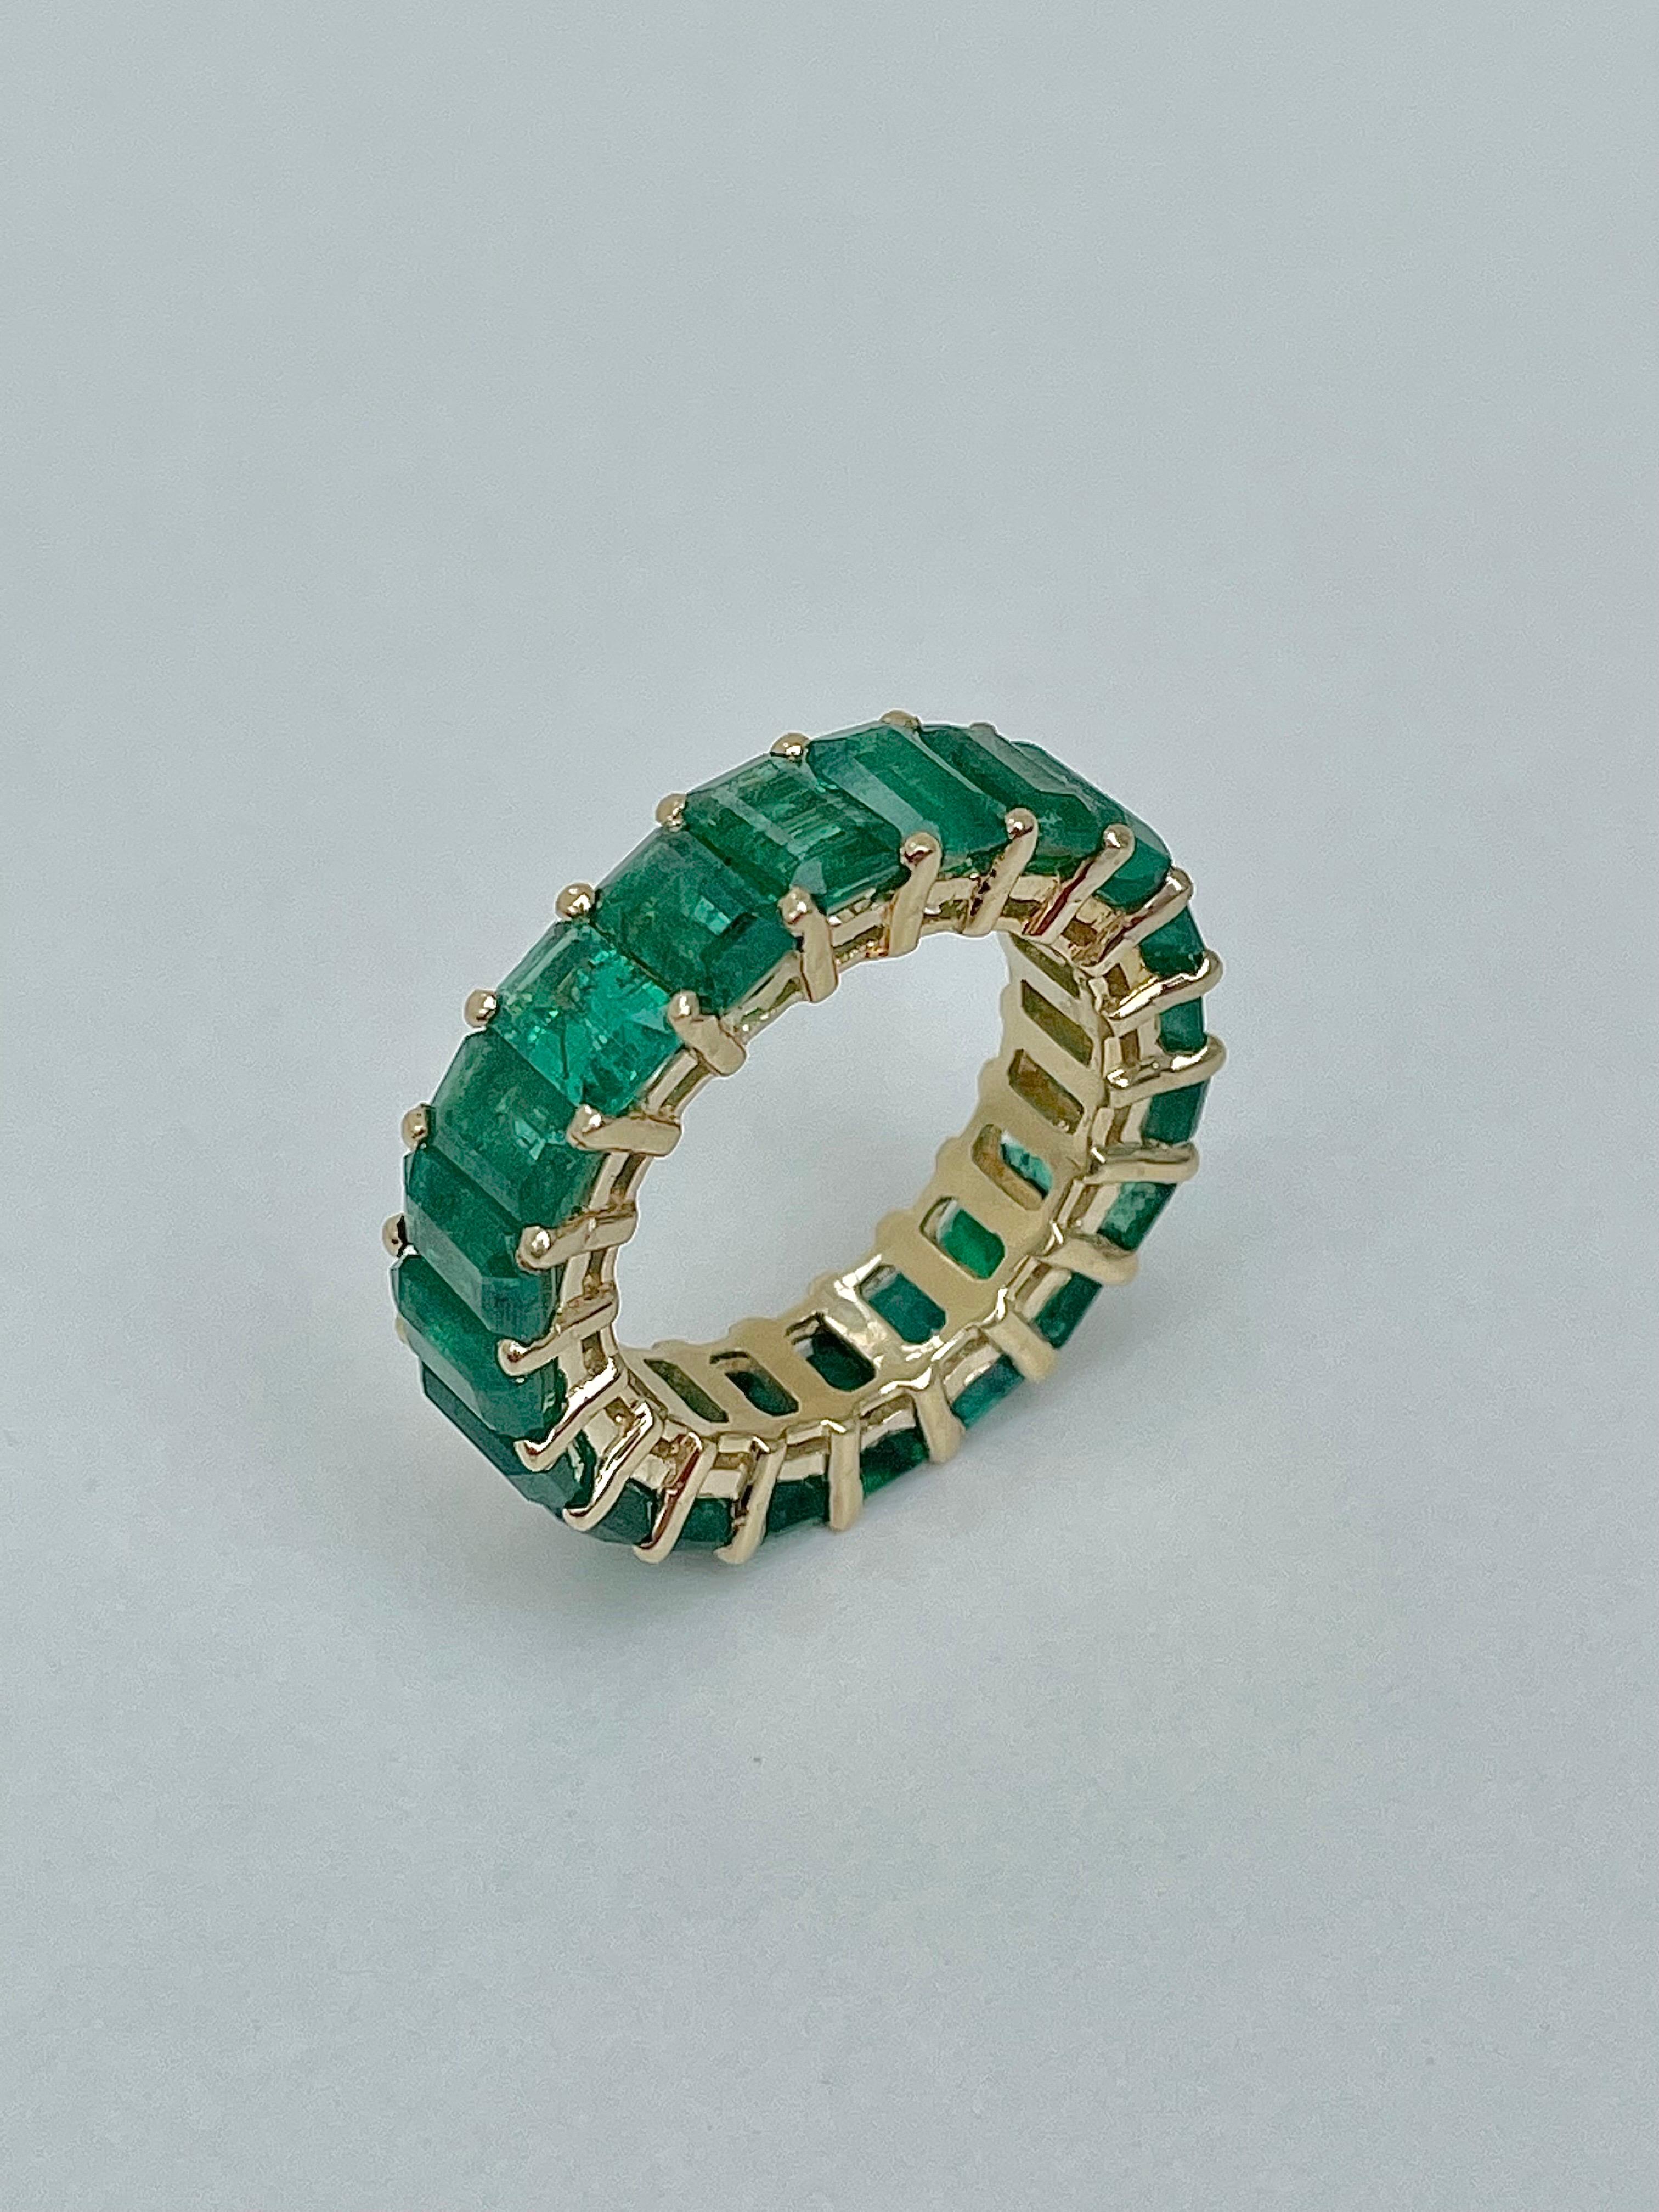 Vintage Chunky Emerald Full Eternity Ring in Yellow Gold

the most incredible full eternity ring, she’s chunky and perfect!

The item comes without the box in the photos but will be presented in a  gift box

Measurements: weight 6.81g, size UK M,